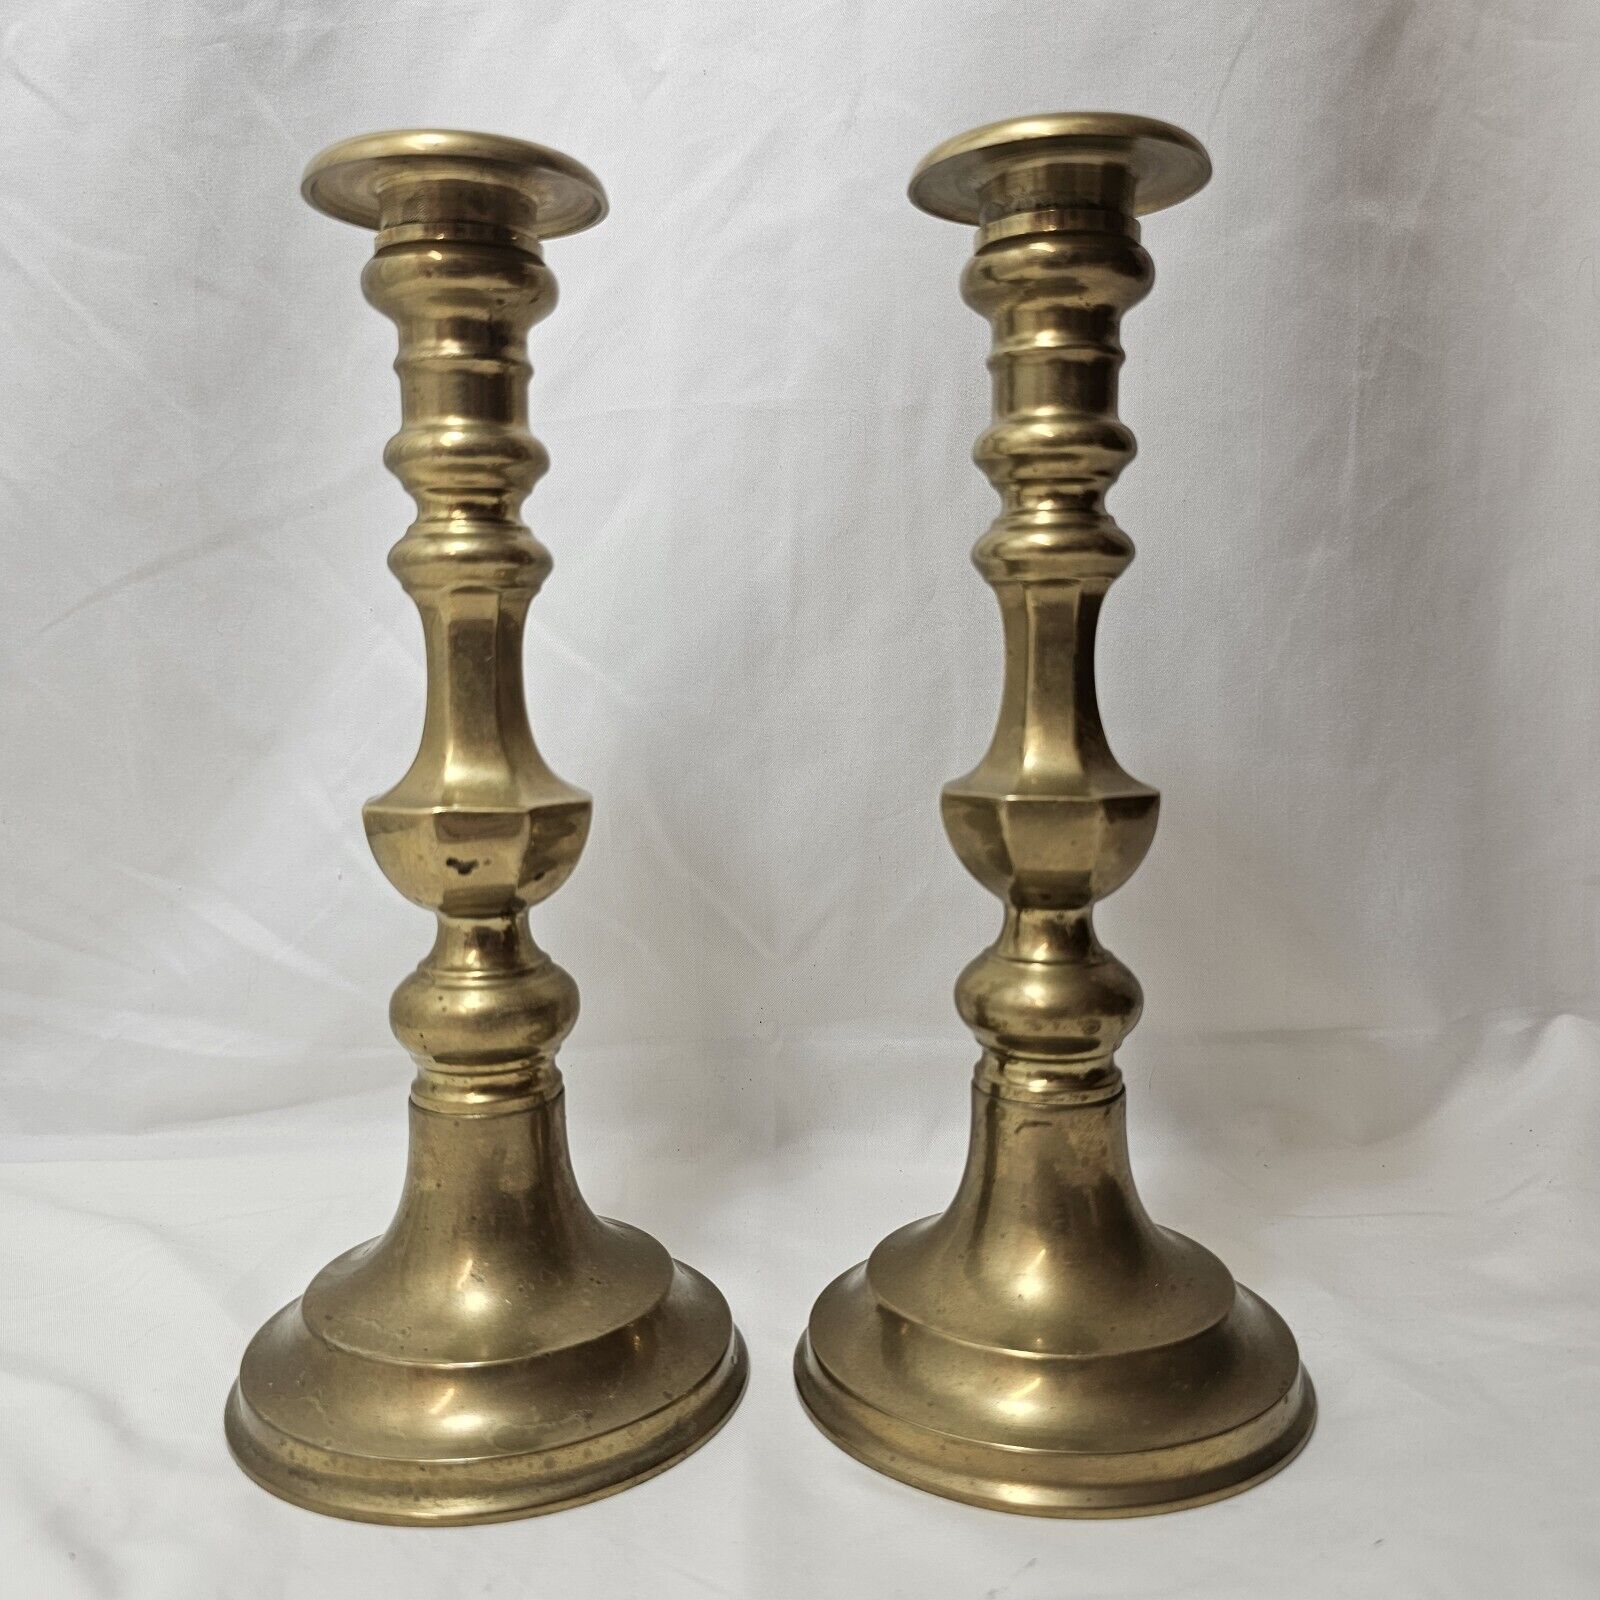 Two Matching Antique Solid Brass Candlesticks, Heavy Beautiful 